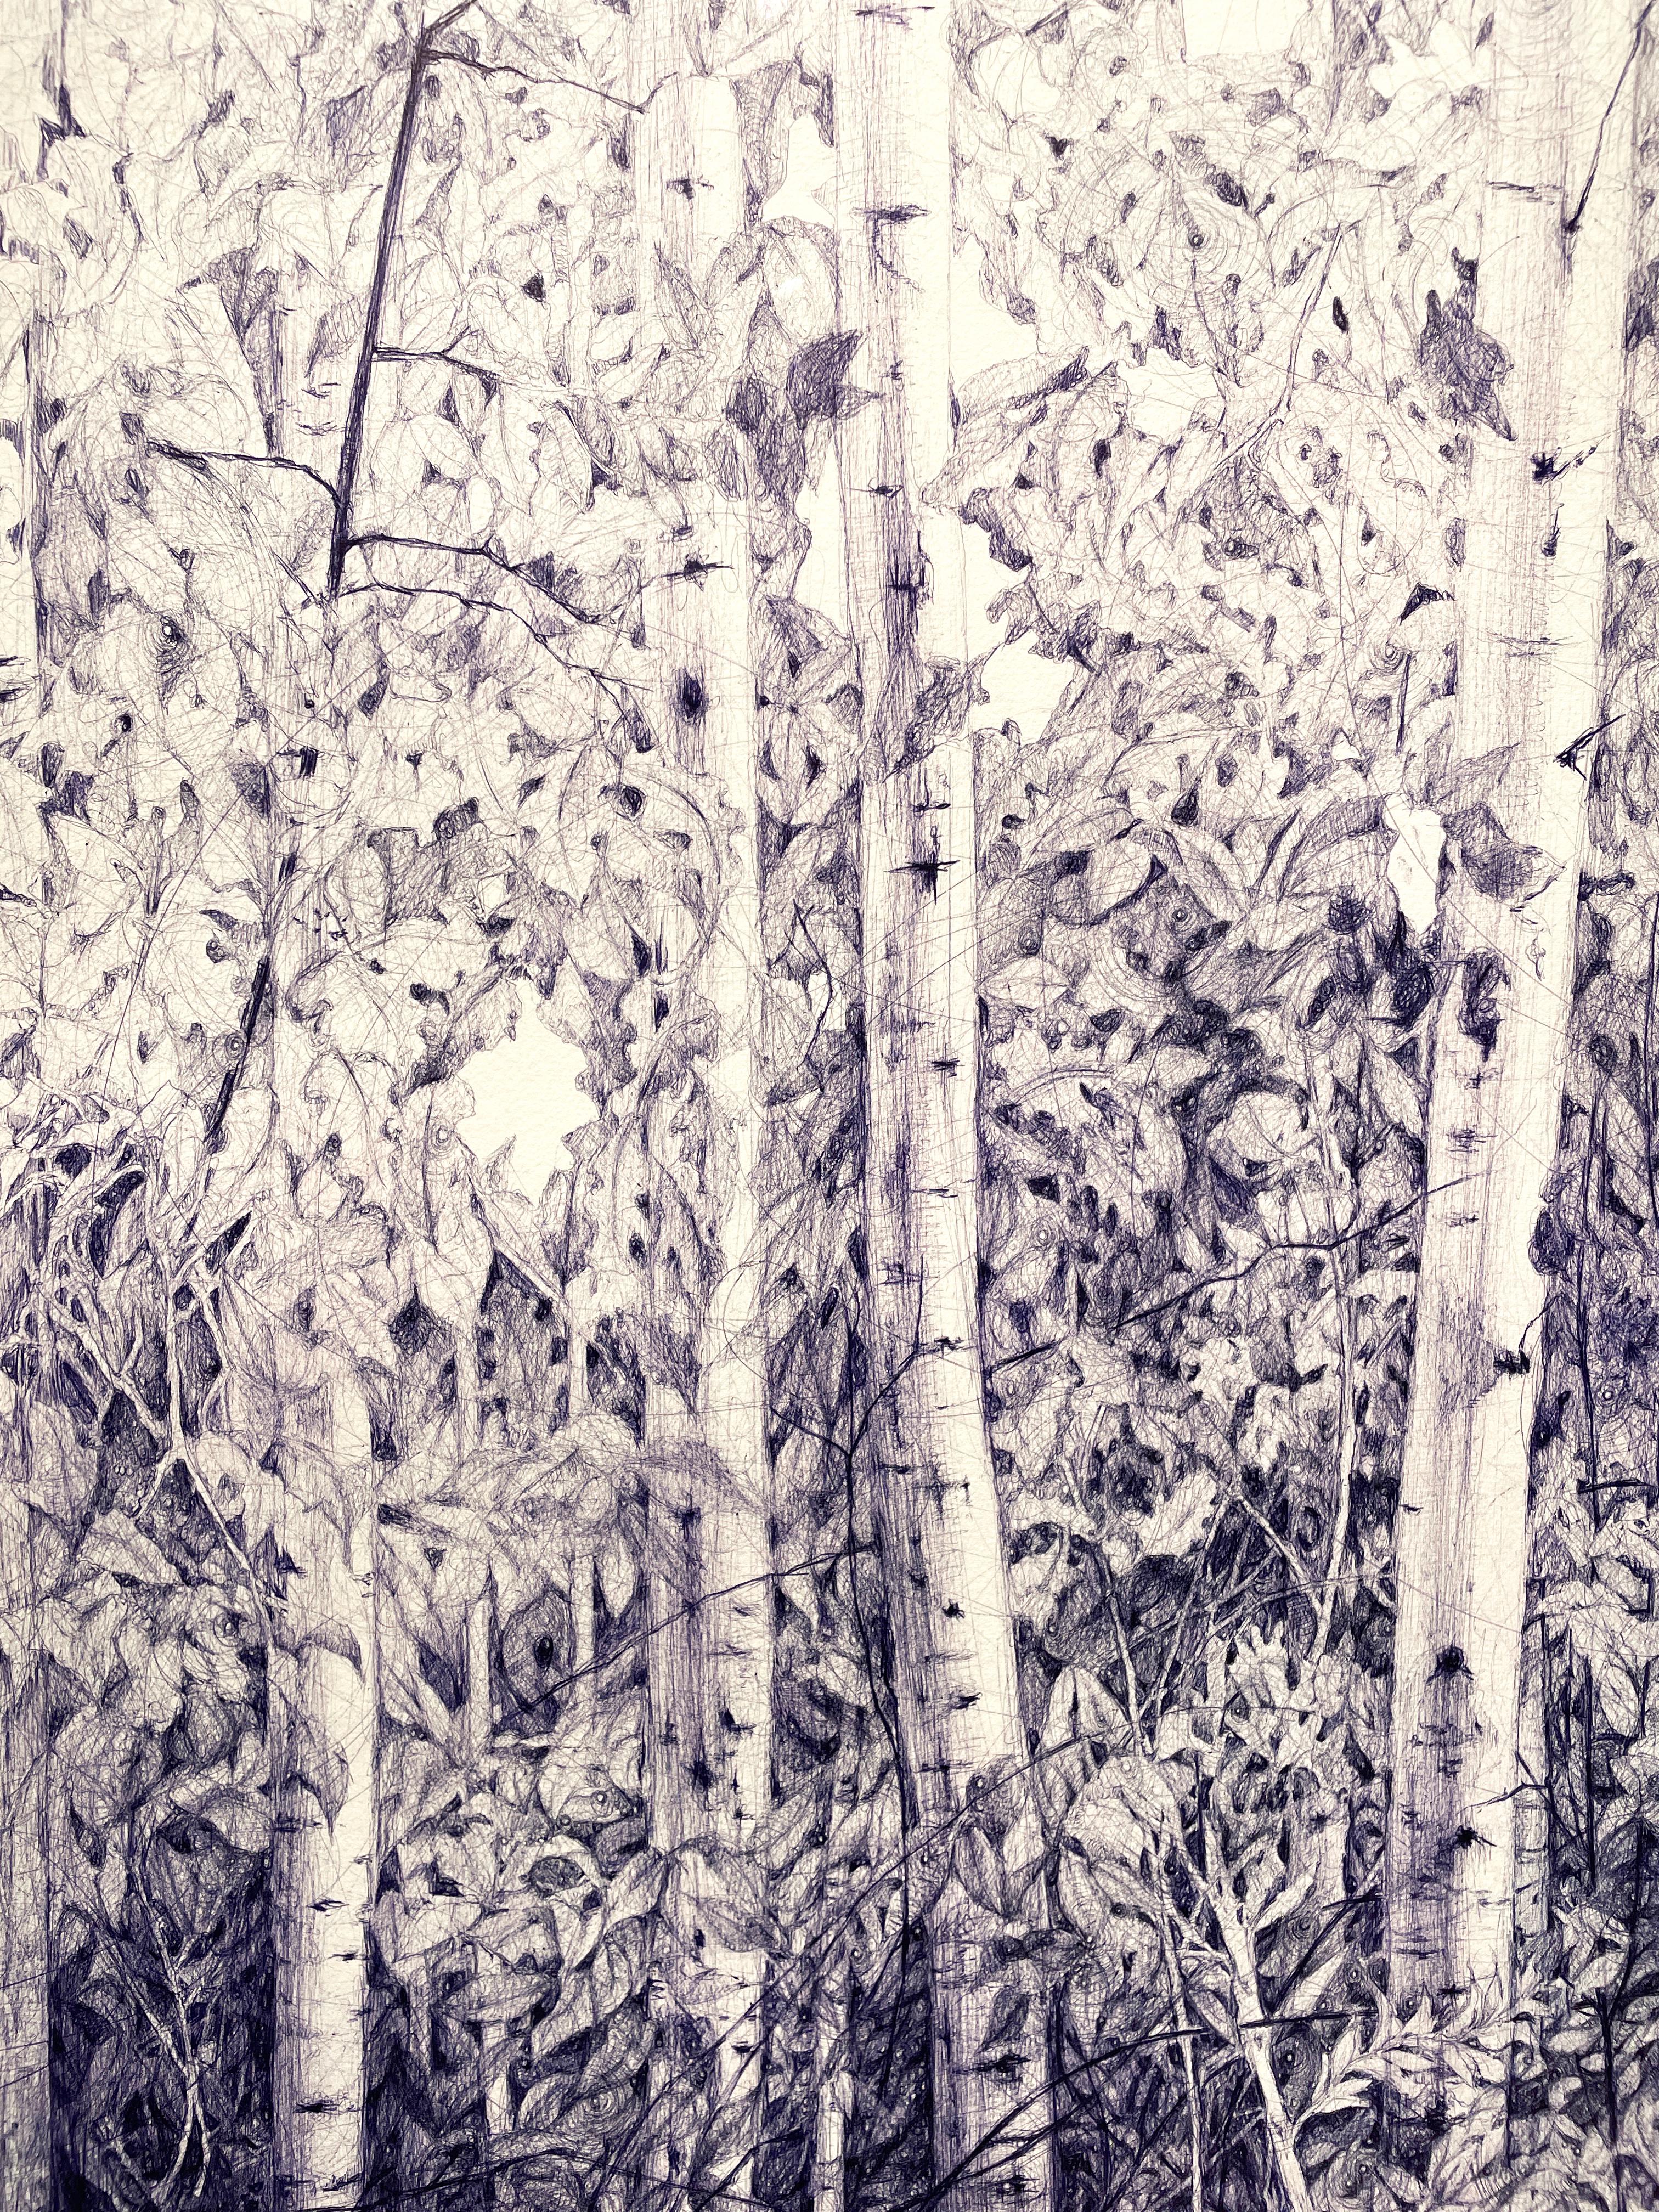 Yield and Overcome (Landscape Drawing of Forest in Archival Blue Ballpoint Pen) - Contemporary Art by Linda Newman Boughton